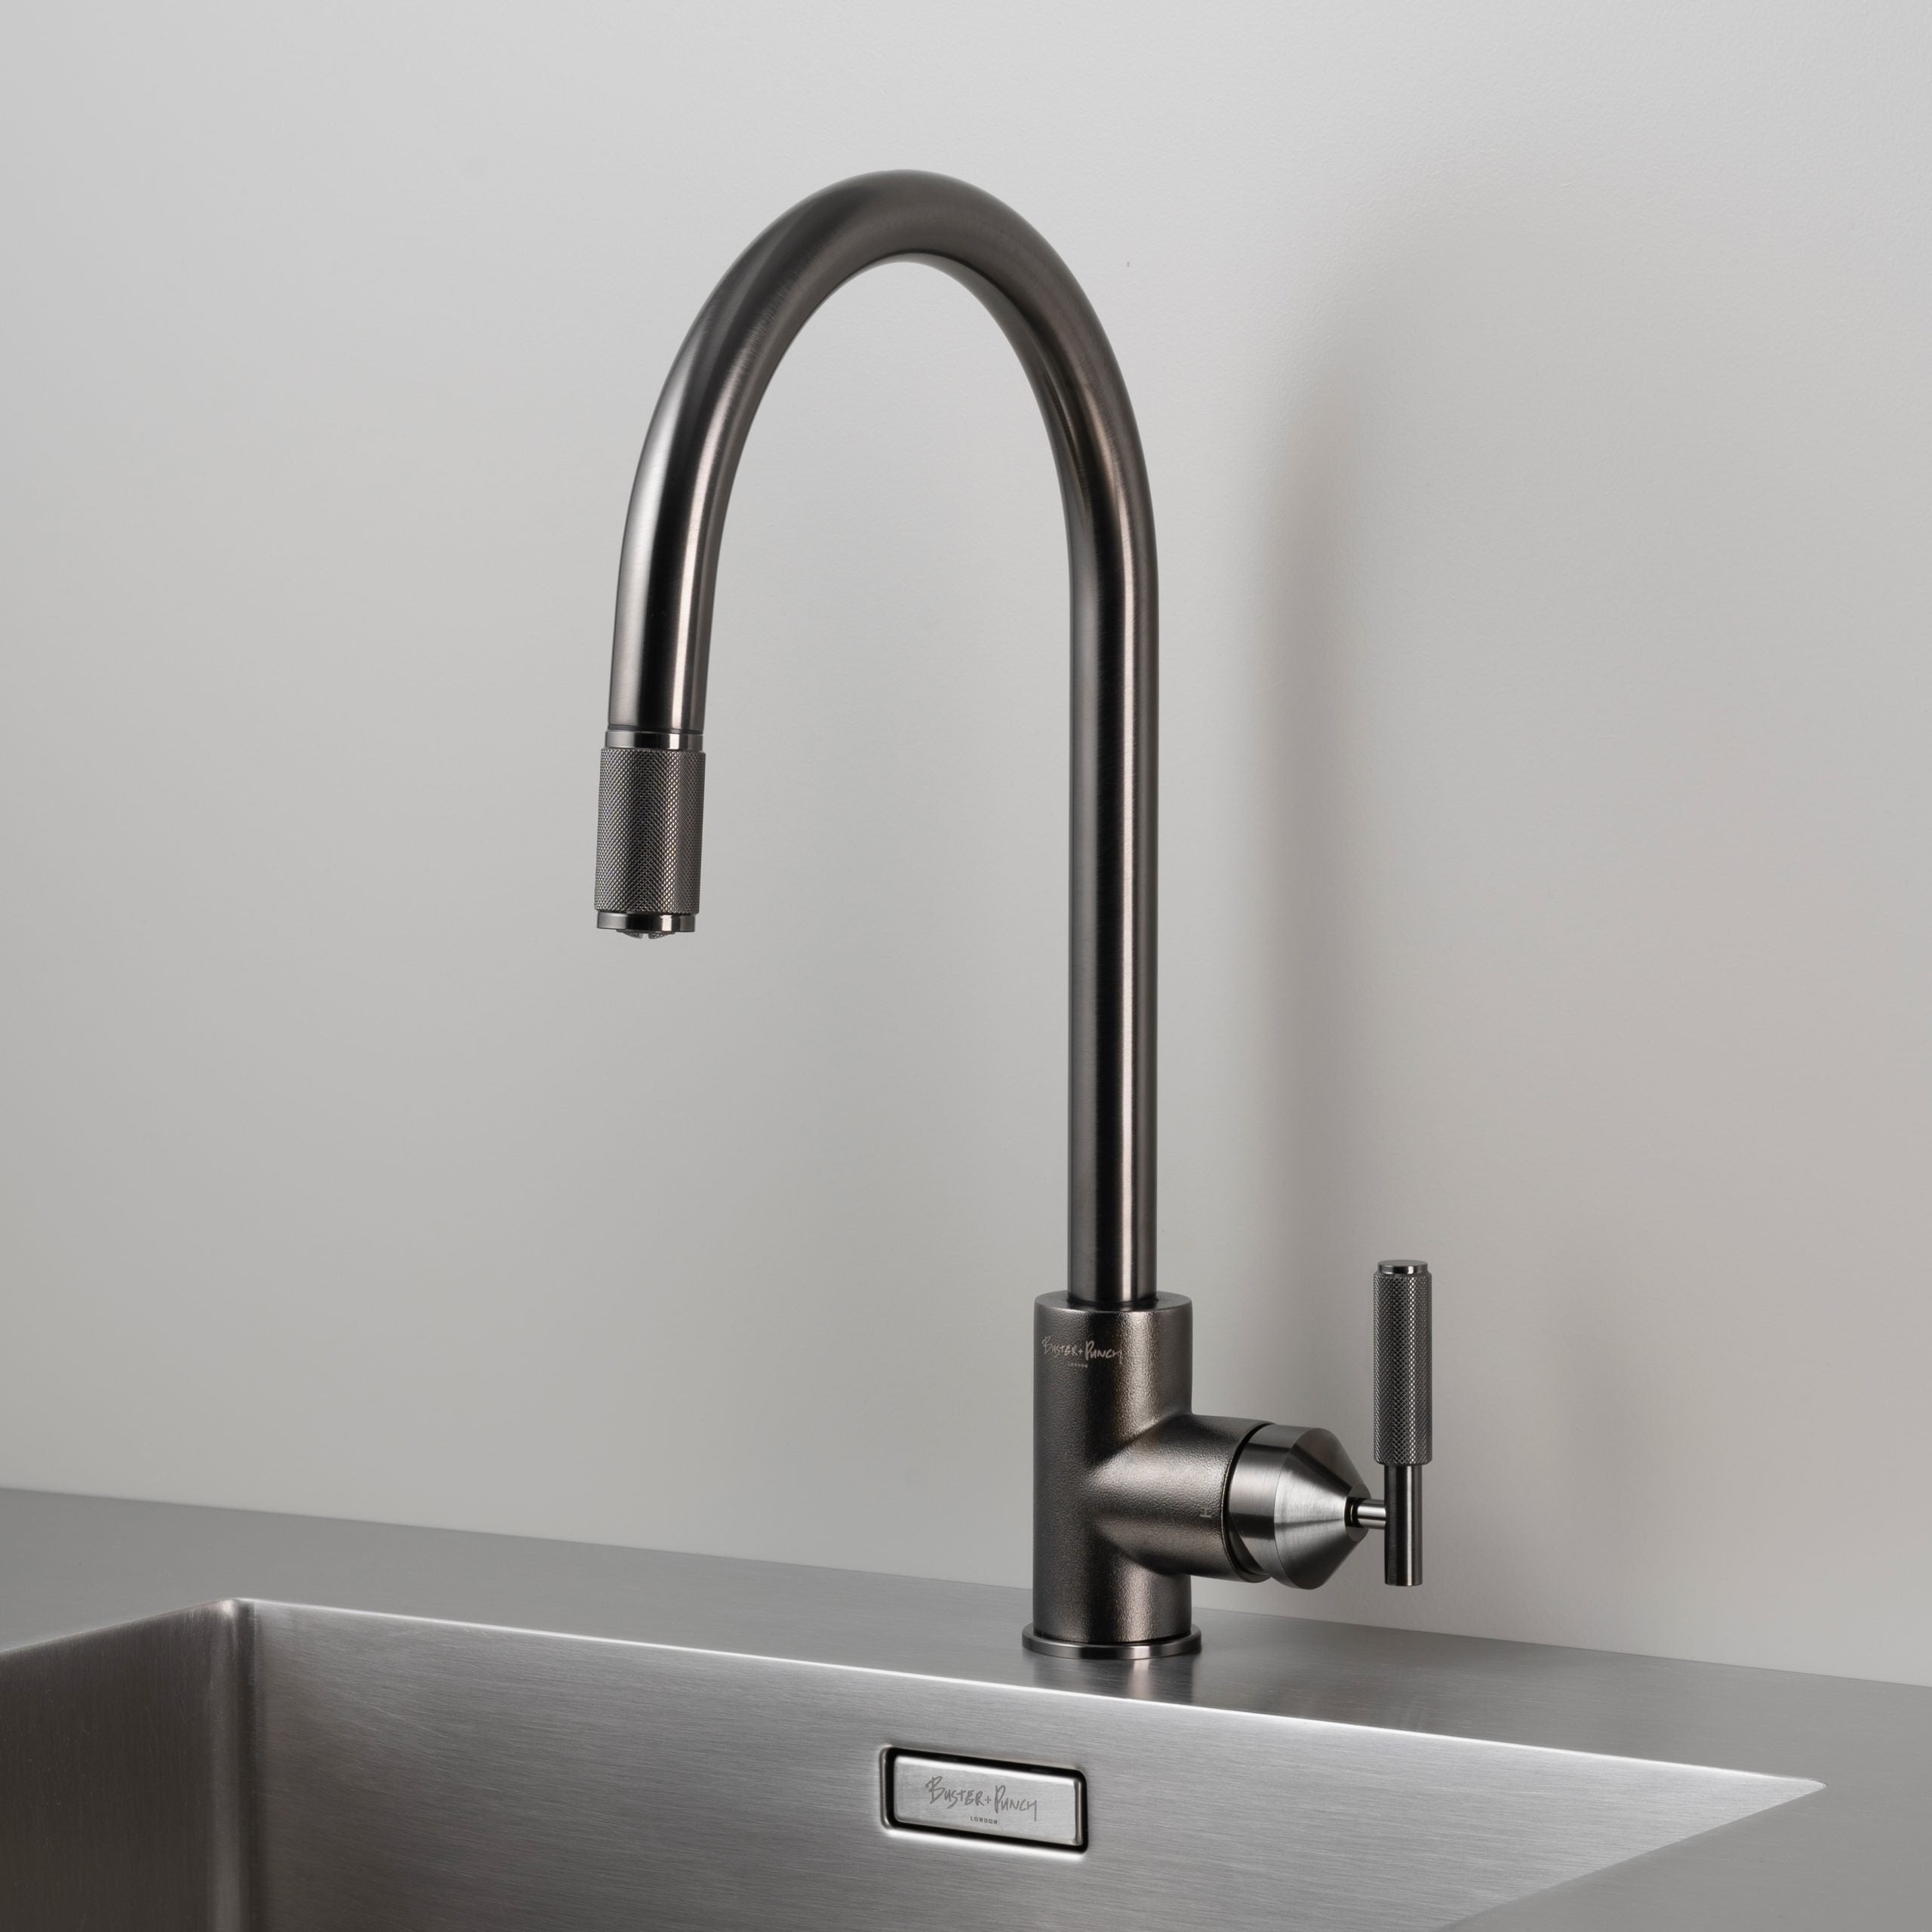 Buster + Punch Kitchen Faucet / Pull-Out Mixer / Linear  Buster + Punch Gunmetal  